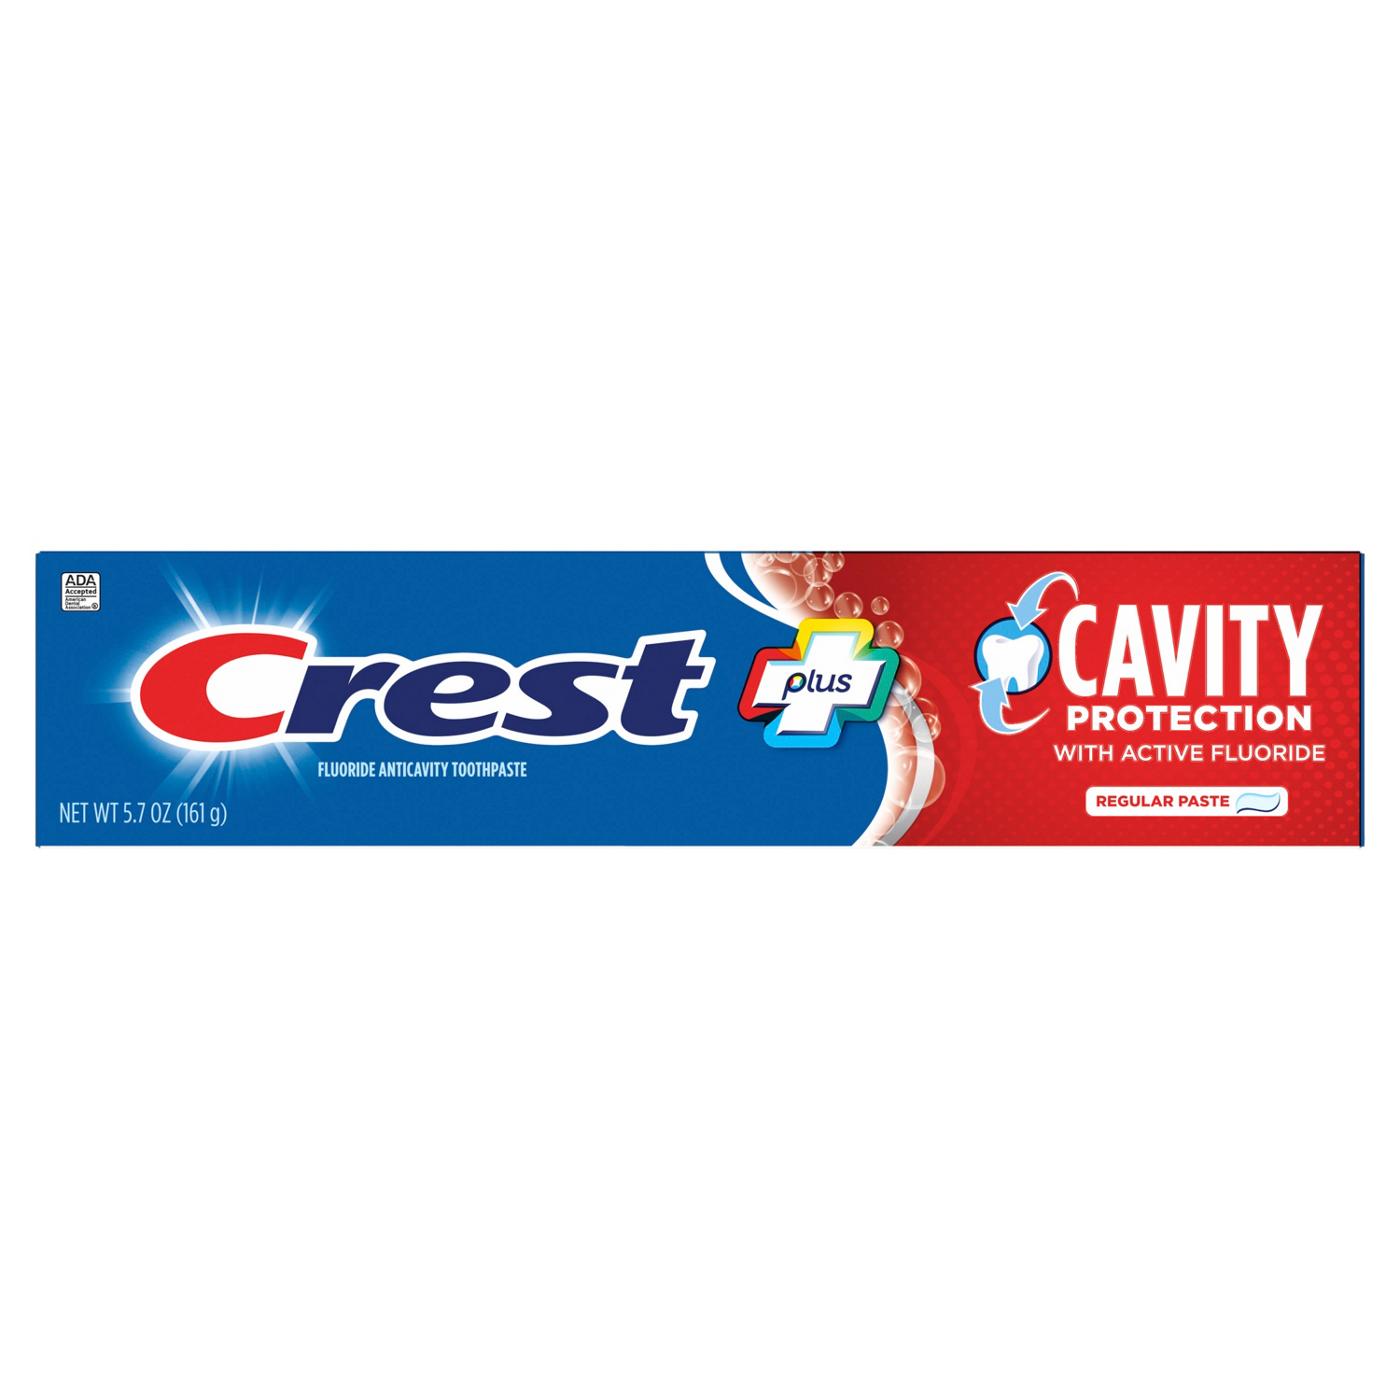 Crest Cavity Protection Regular Toothpaste; image 1 of 9